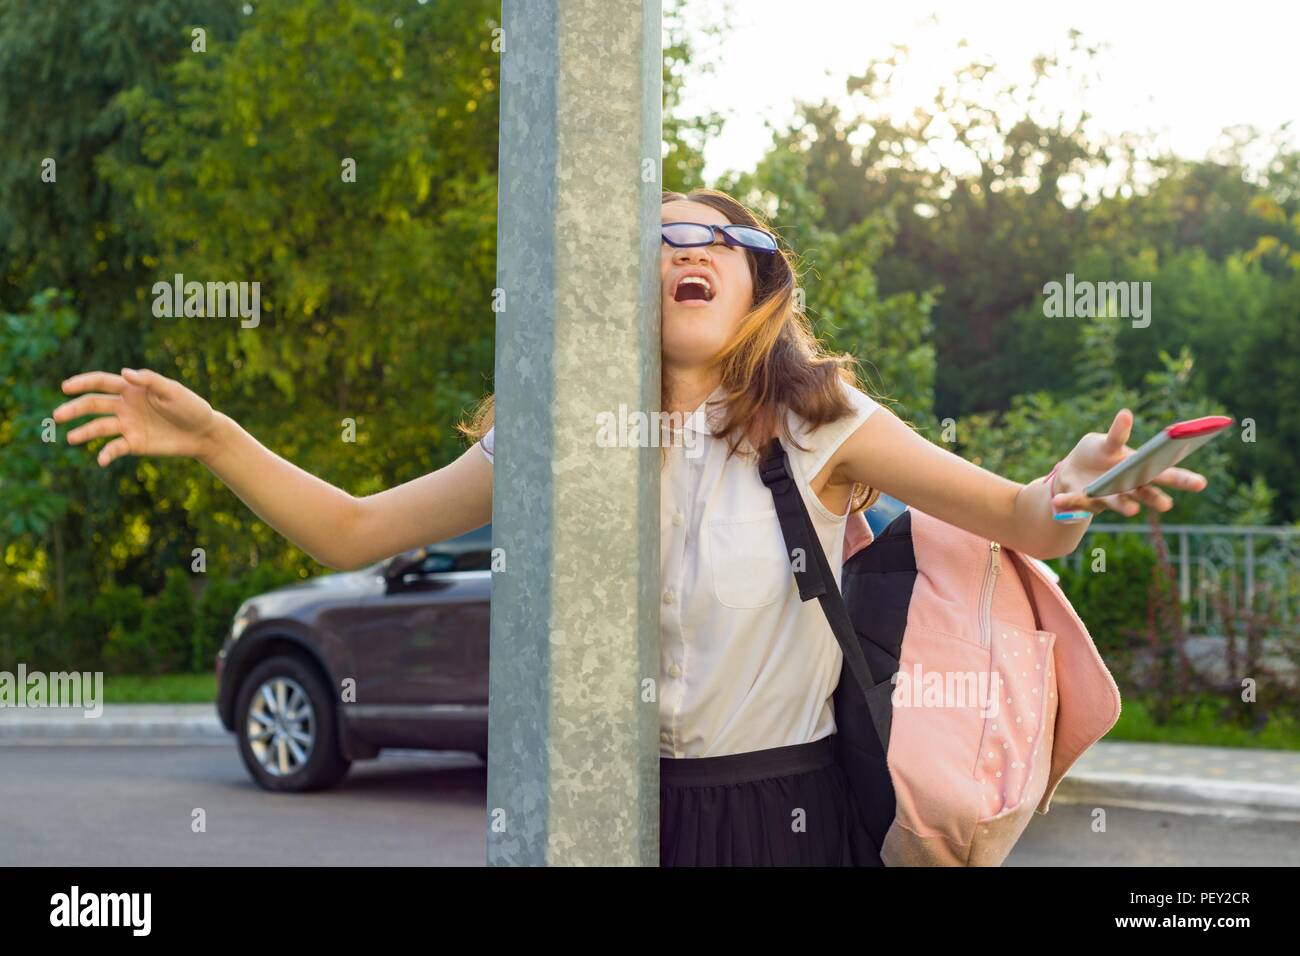 Portrait of young inattentive girl, distracted by mobile phone. Girl crashed into street post, dropped phone Stock Photo